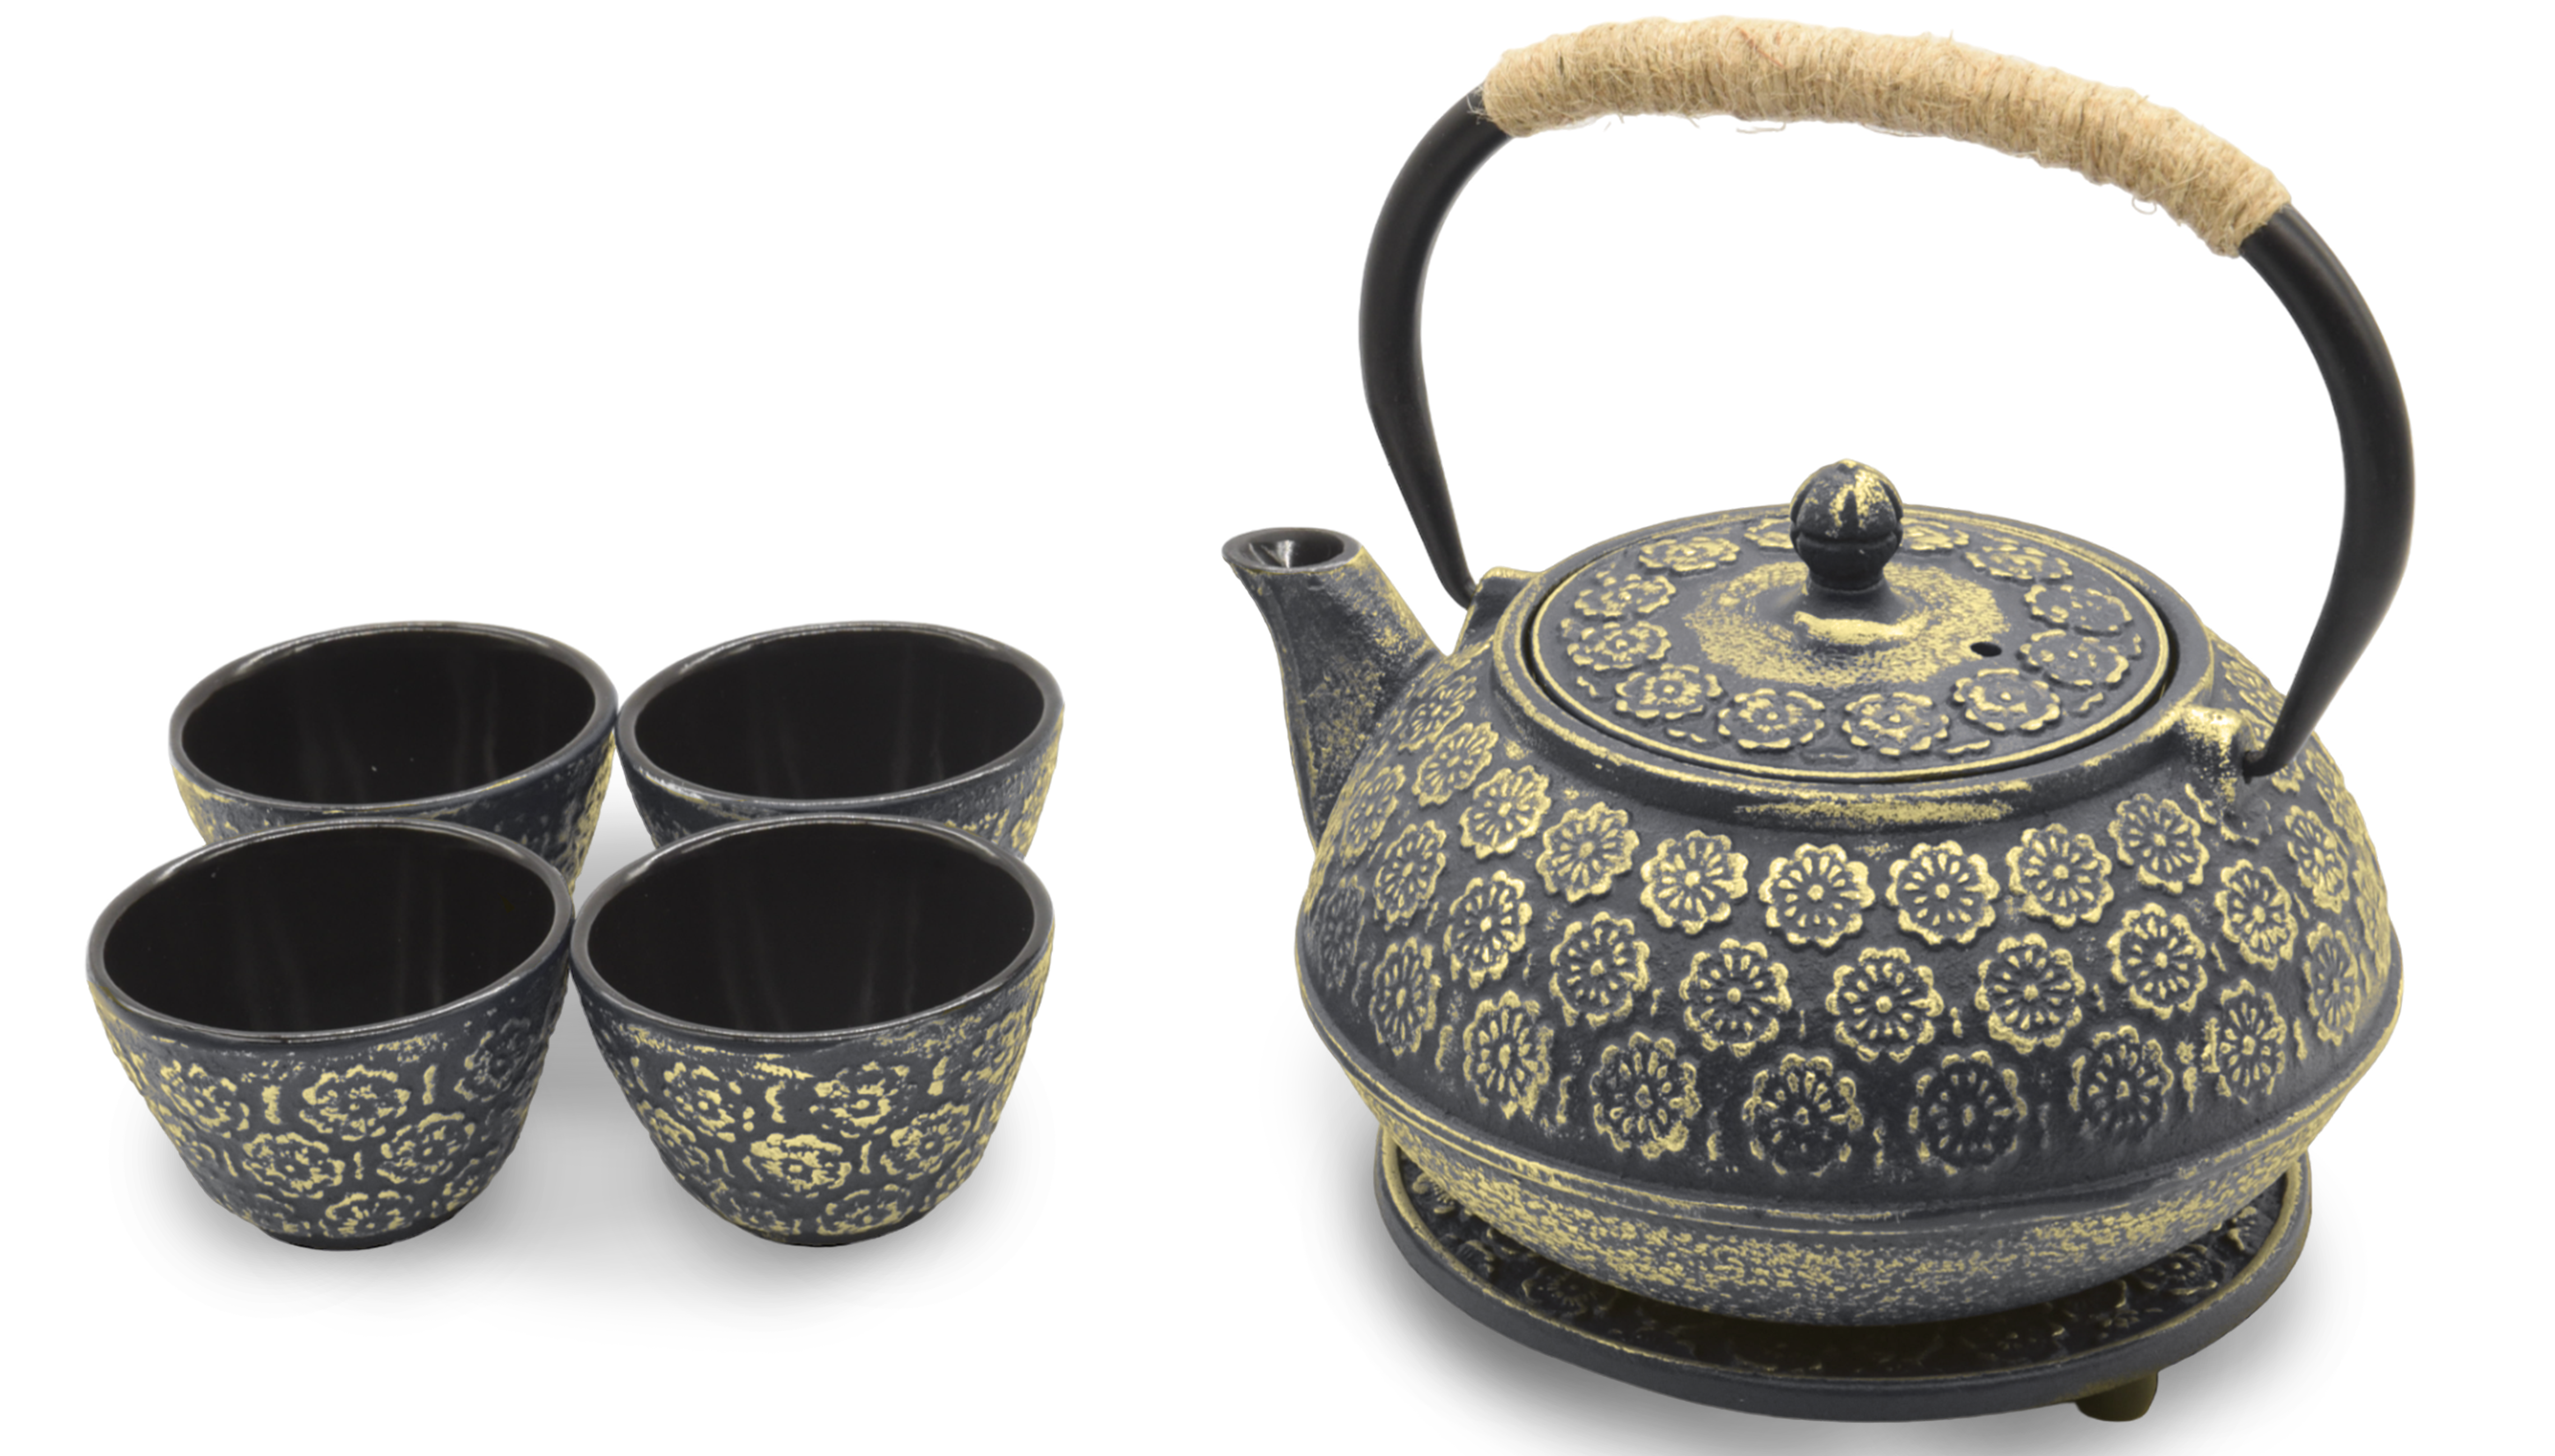 1.0 Liter Enamel Coated Cast Iron Sakura Blossom Teapot Set with 4 Cup –  Cuisiland